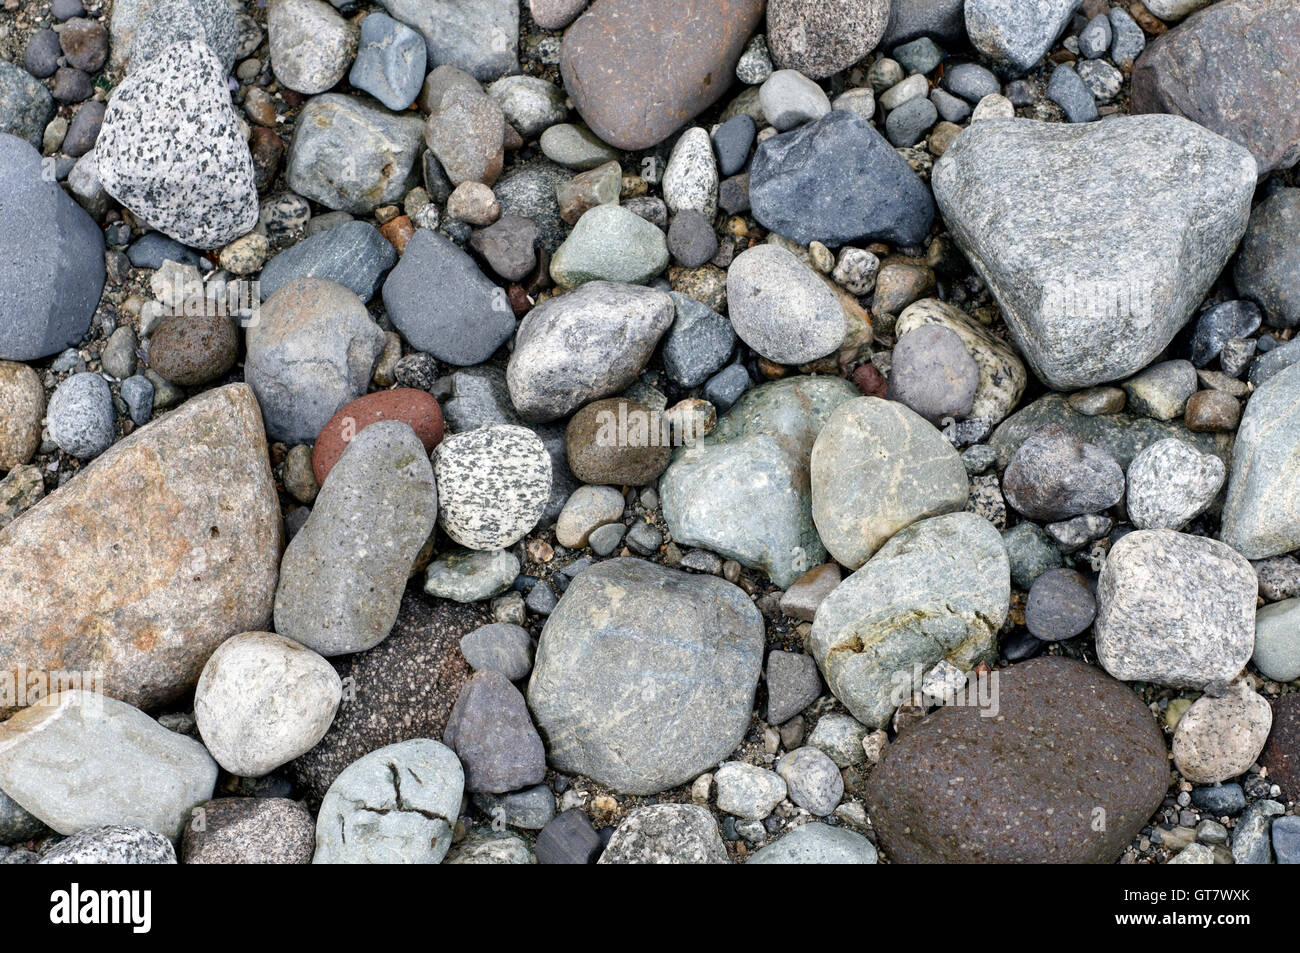 Weathered rocks of various sizes on a rocky beach, Vancouver, British Columbia, Canada Stock Photo